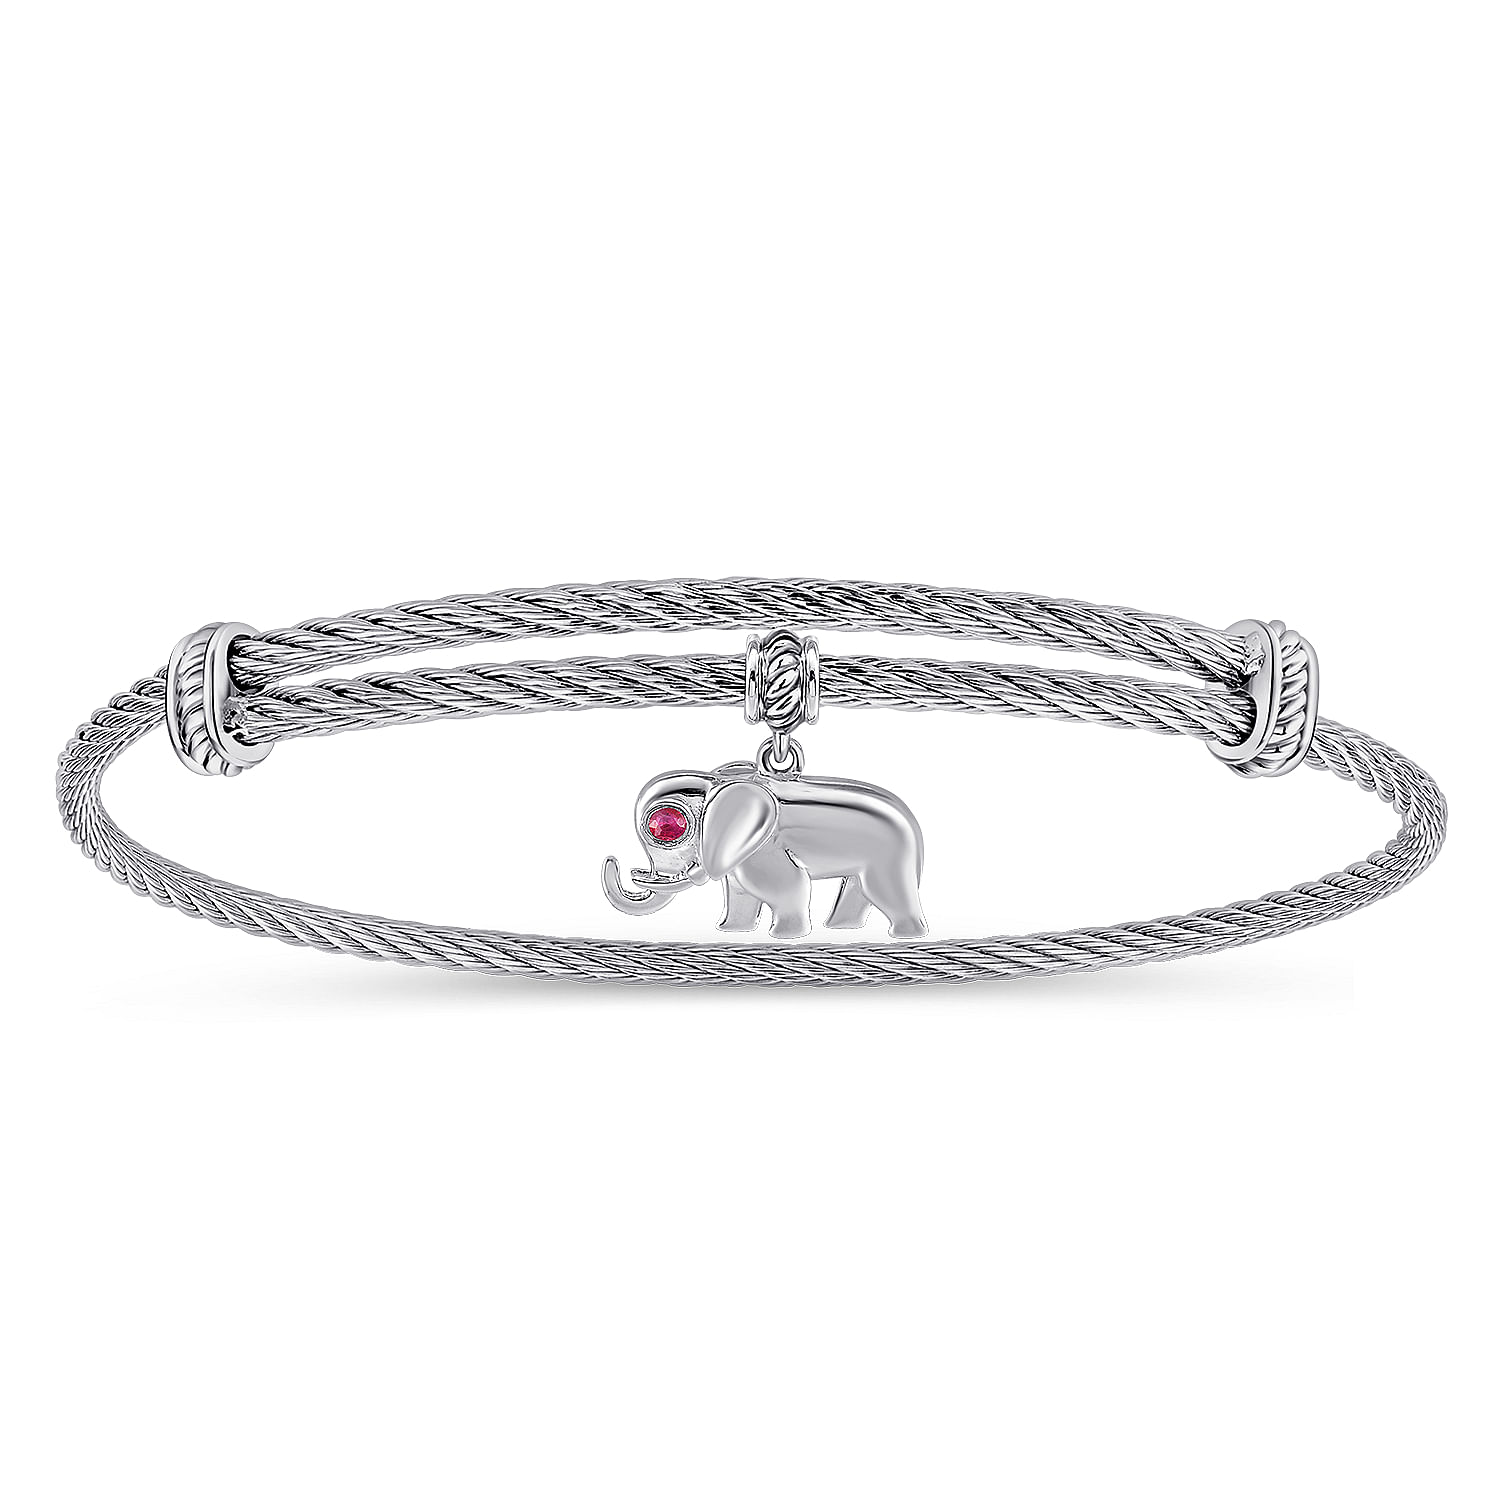 Adjustable Twisted Cable Stainless Steel Bangle with Sterling Silver Ruby Elephant Charm